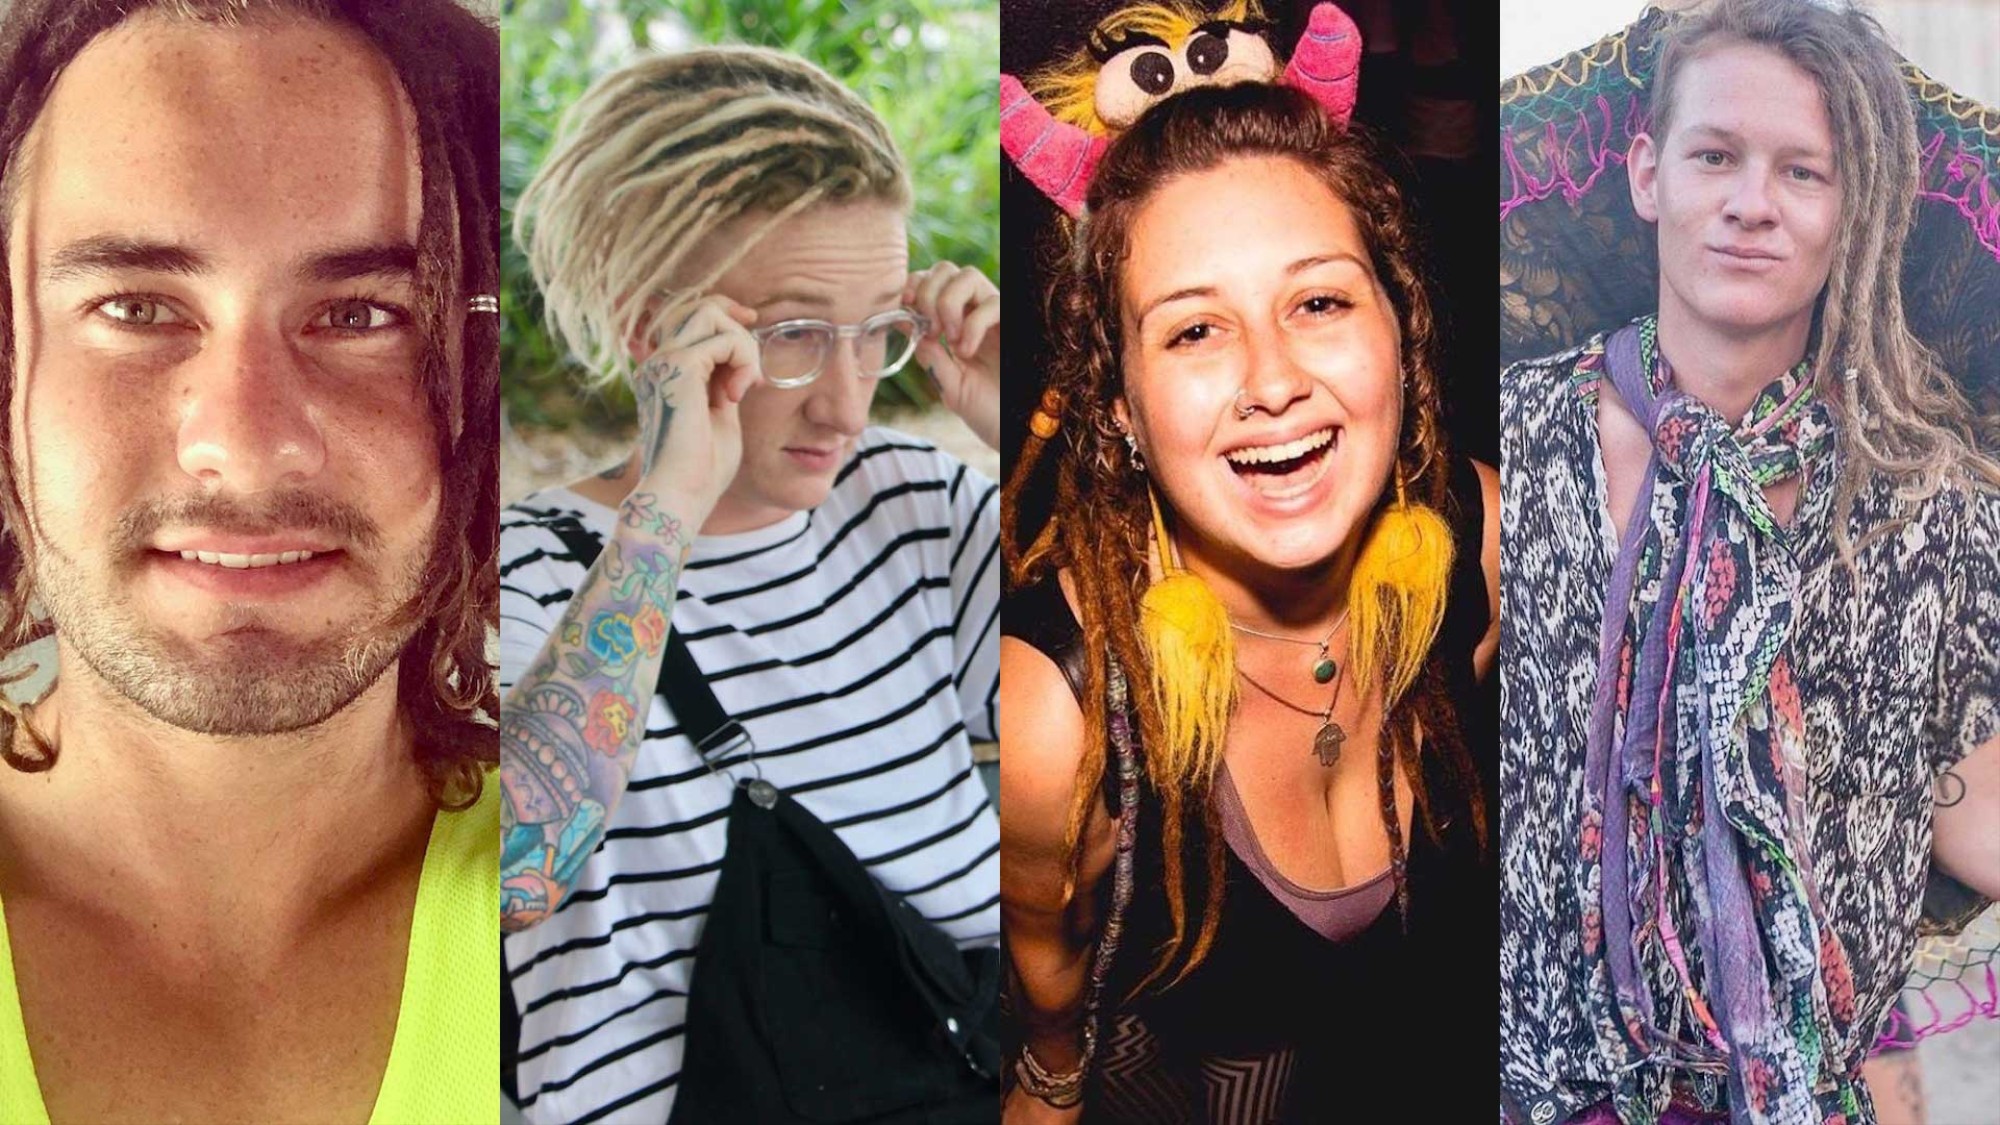 We Asked White People With Dreadlocks Why Vice